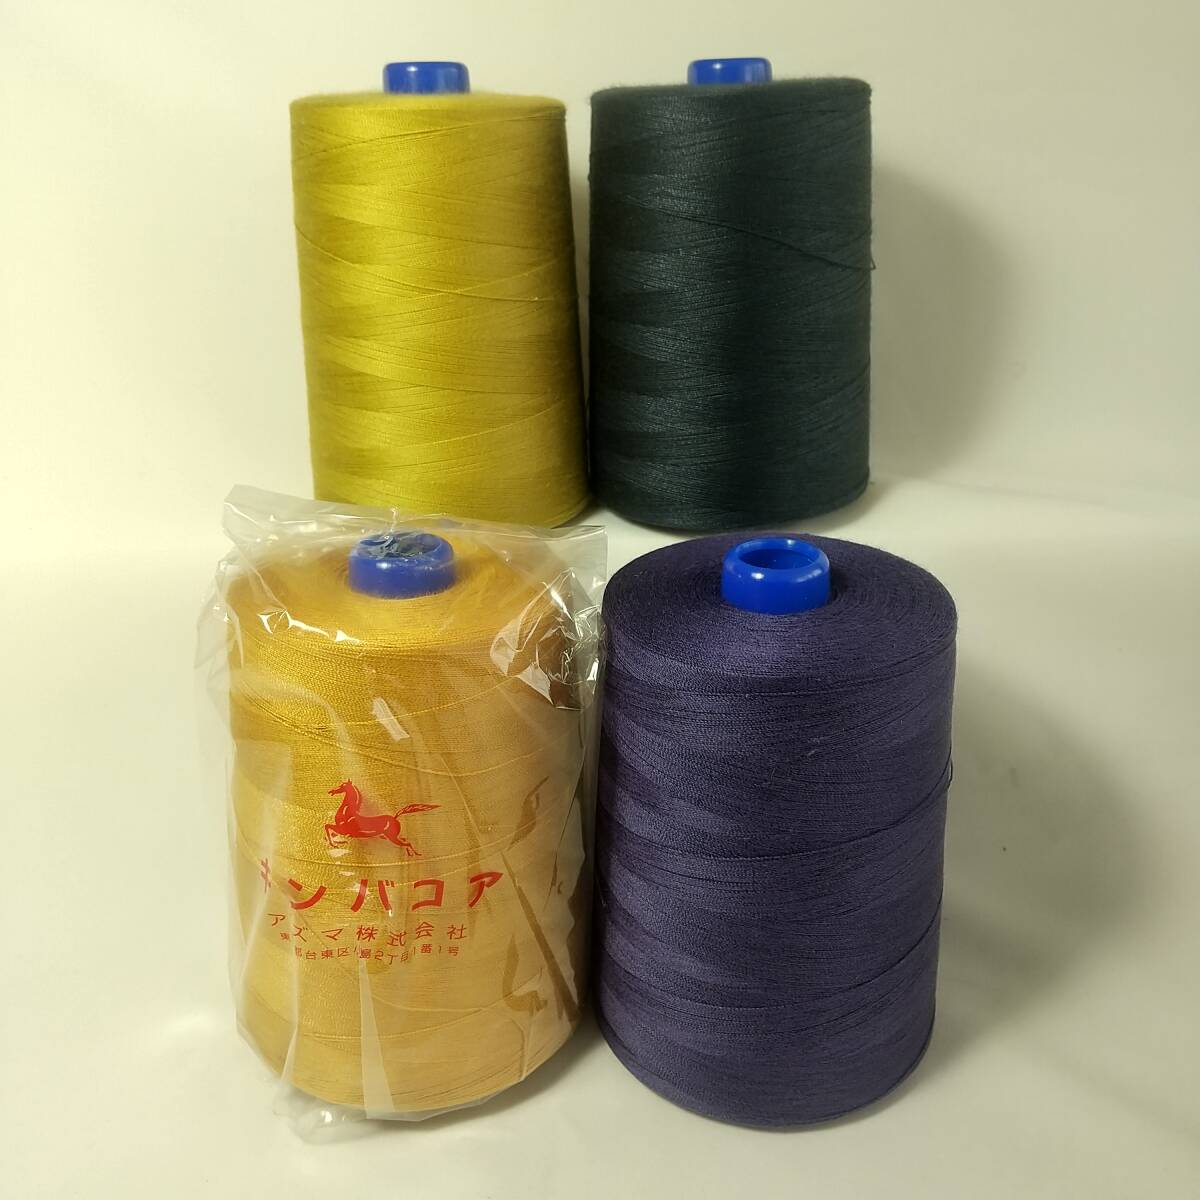  industry sewing-cotton / many remainder /#30/ core / futoshi count /4 color 4ps.@/ Denim / leather / thickness / tube H34